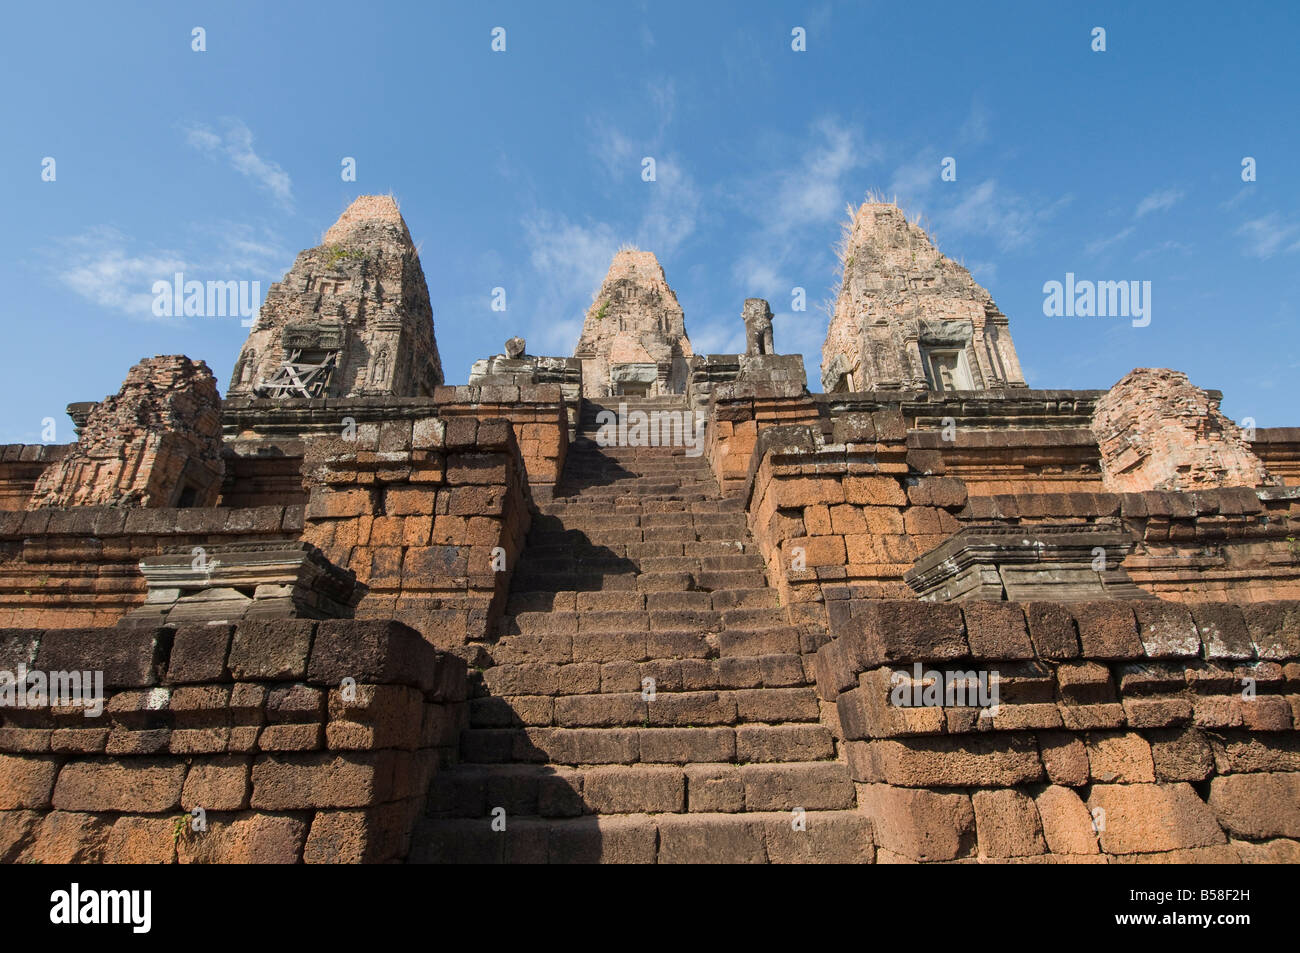 Pre Rup temple, AD 961, Siem Reap, Cambodia, Indochina, Southeast Asia Stock Photo